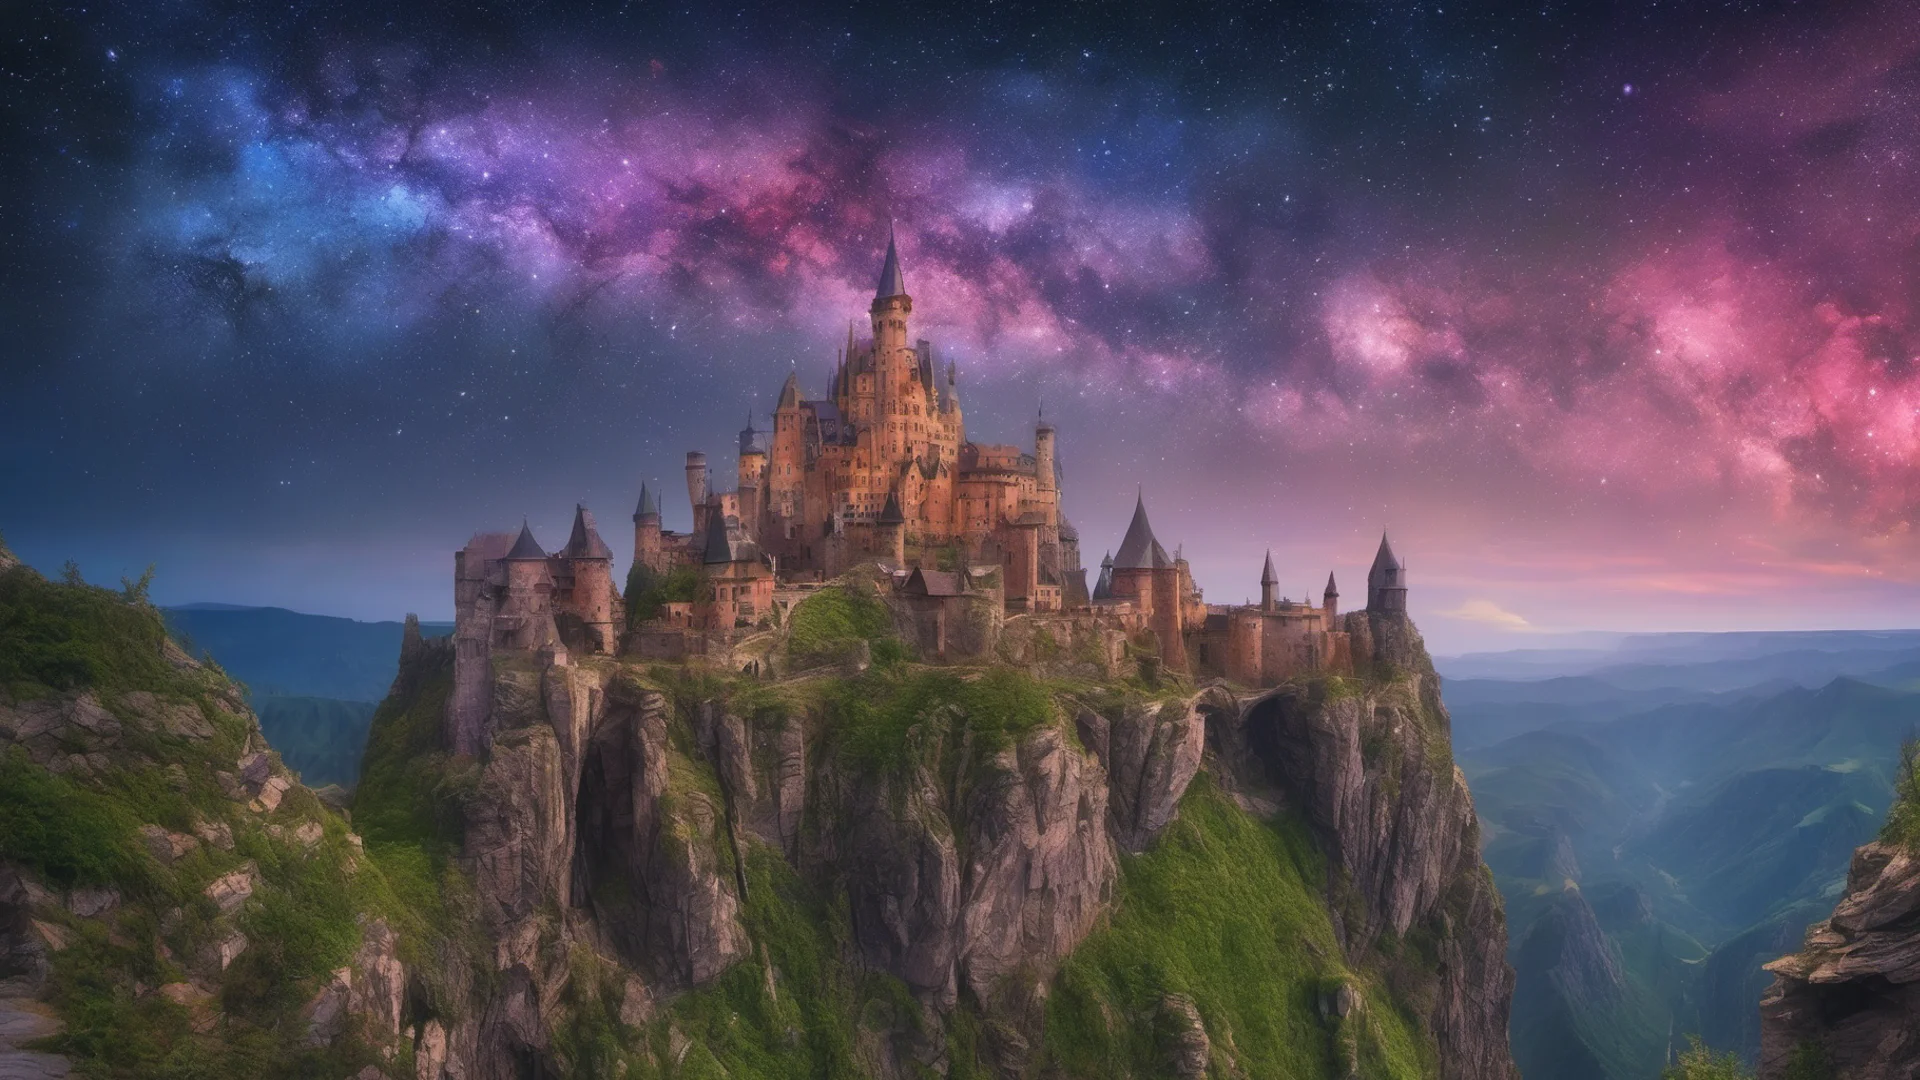 aicastle unreal landscape amazing starry colorful galaxies in sky steep cliffs overhangs  amazing awesome portrait 2 wide